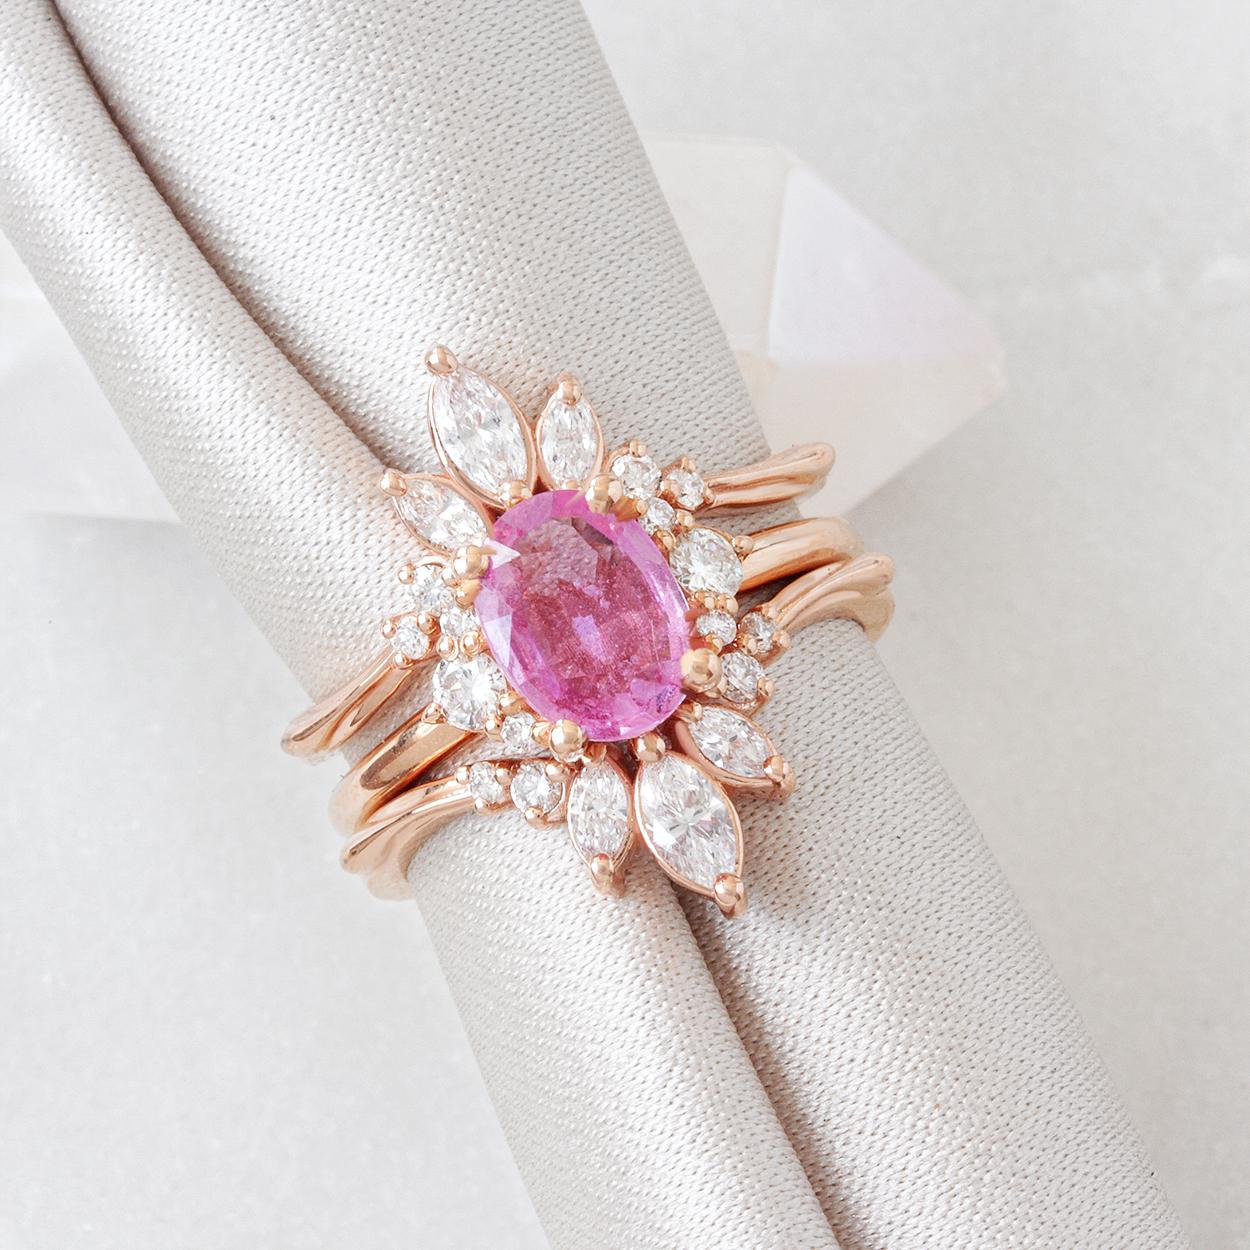 For Sale:  Oval Pink Sapphire and Diamonds Engagement Ring and Ring Guard Isabella Danielle 5